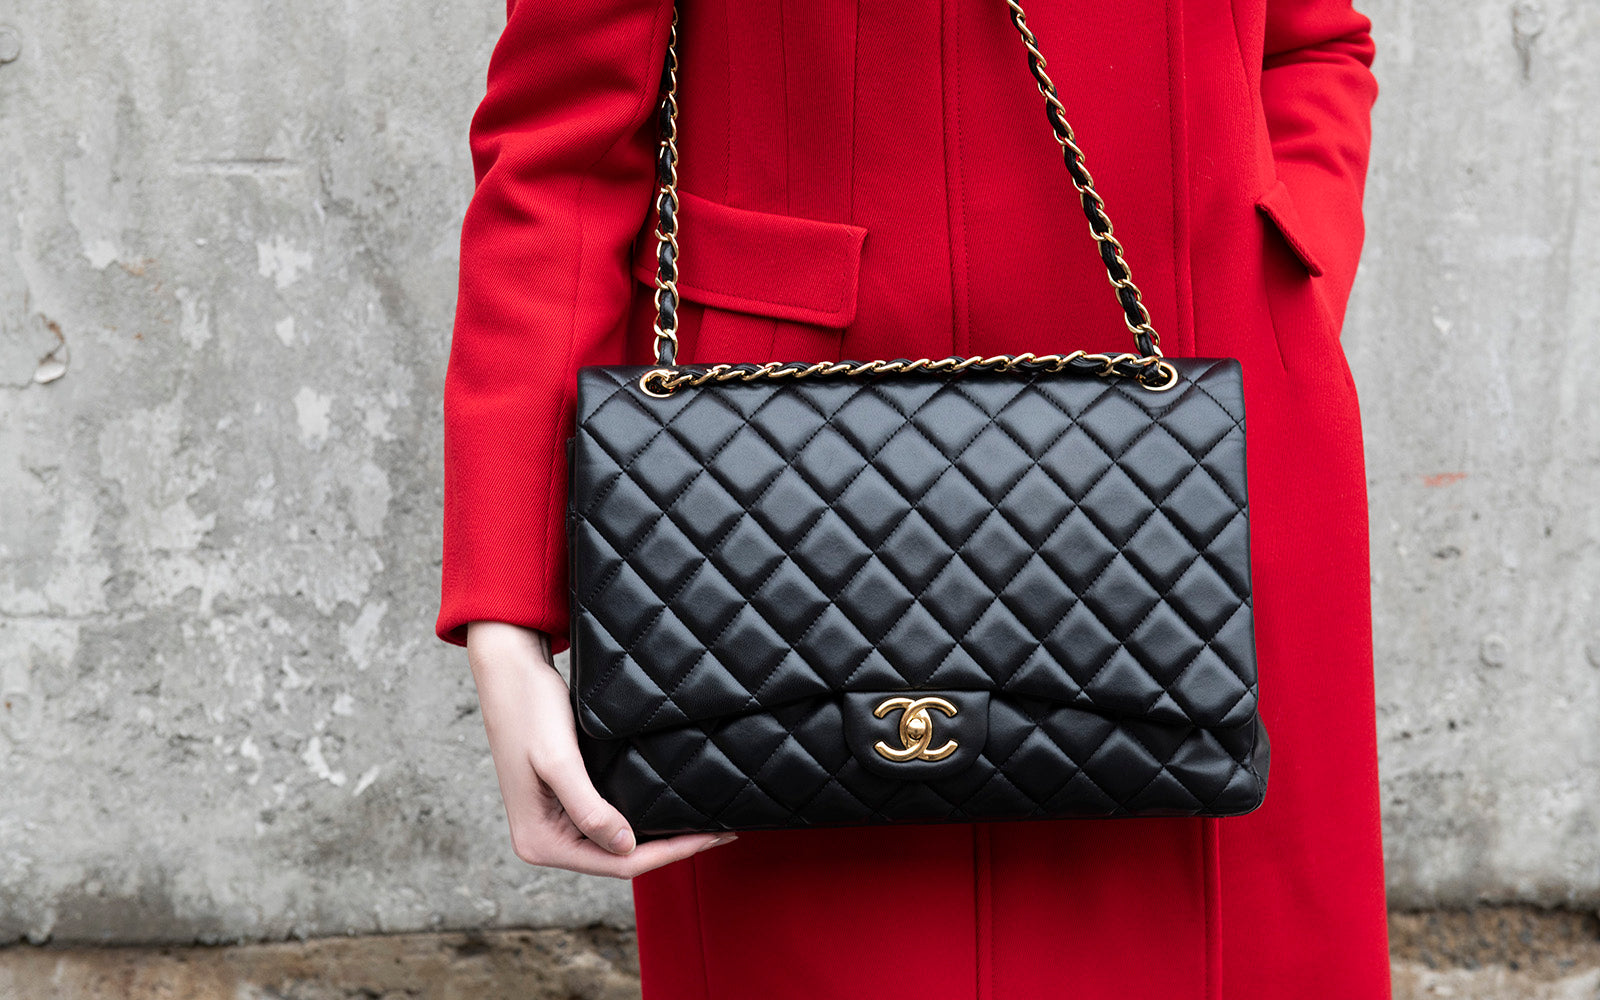 Discover authentic preowned Chanel handbags in Canada